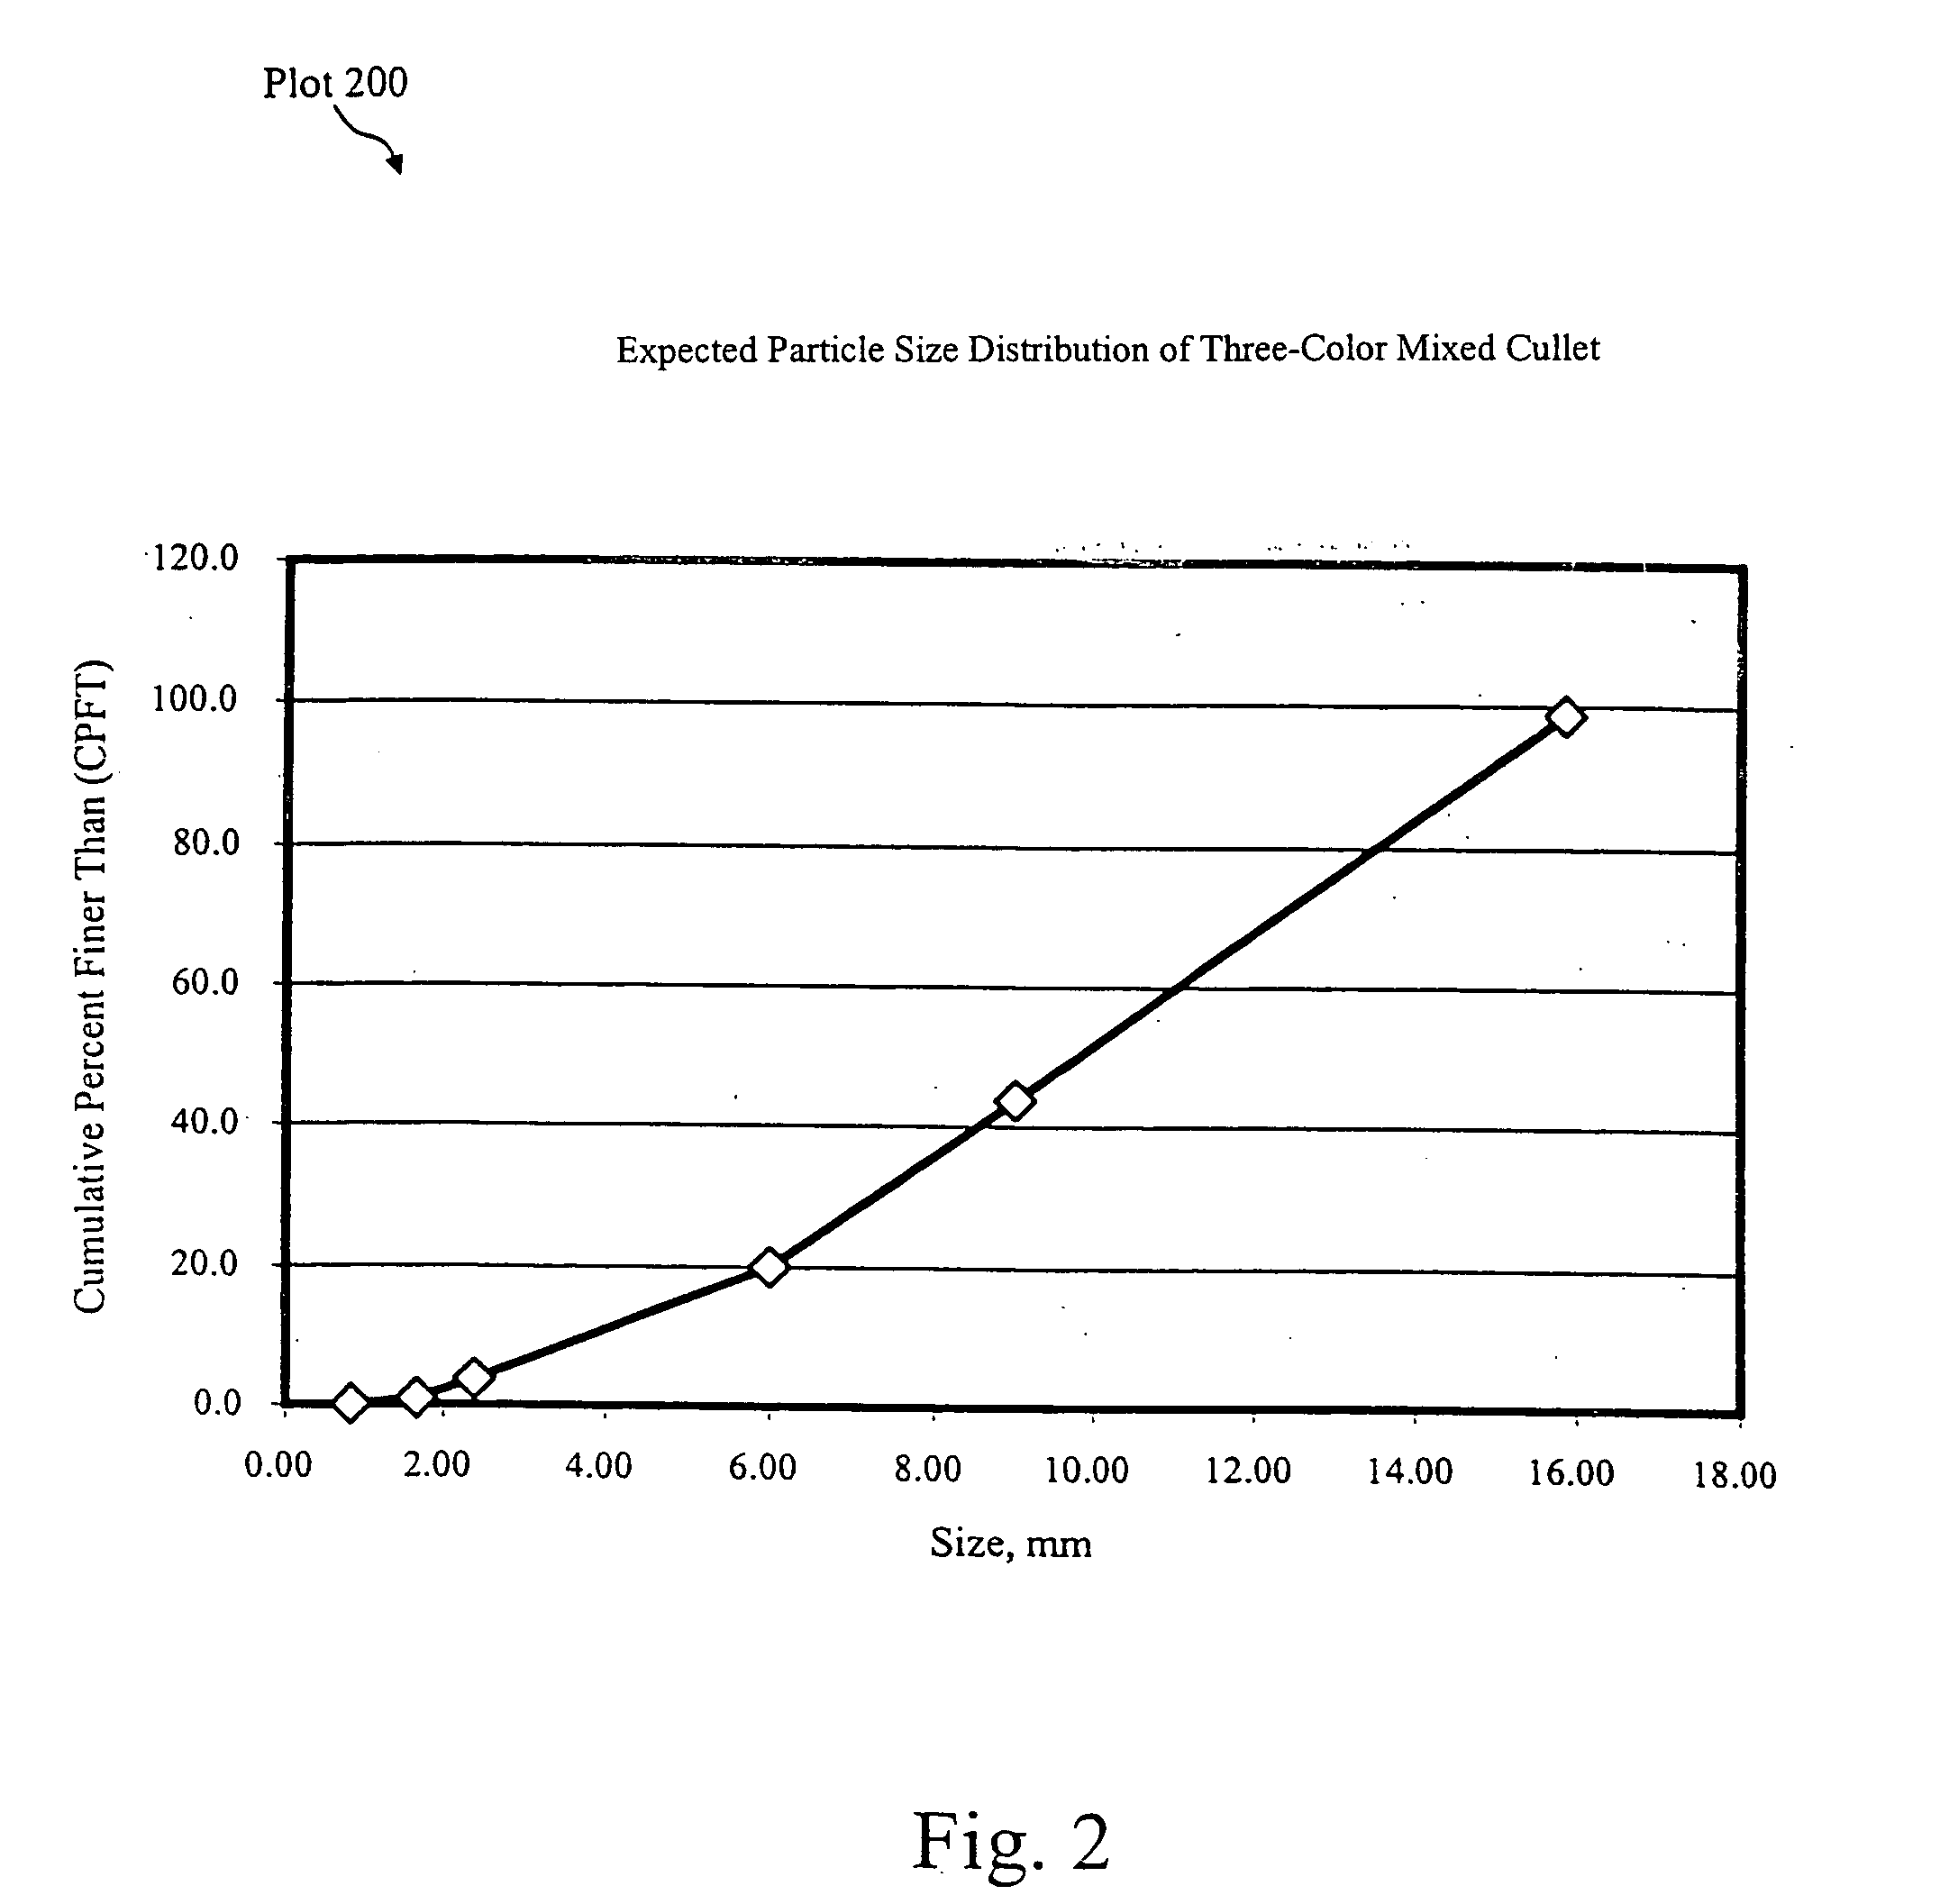 Method of analyzing mixed-color cullet to facilitate its use in glass manufacture